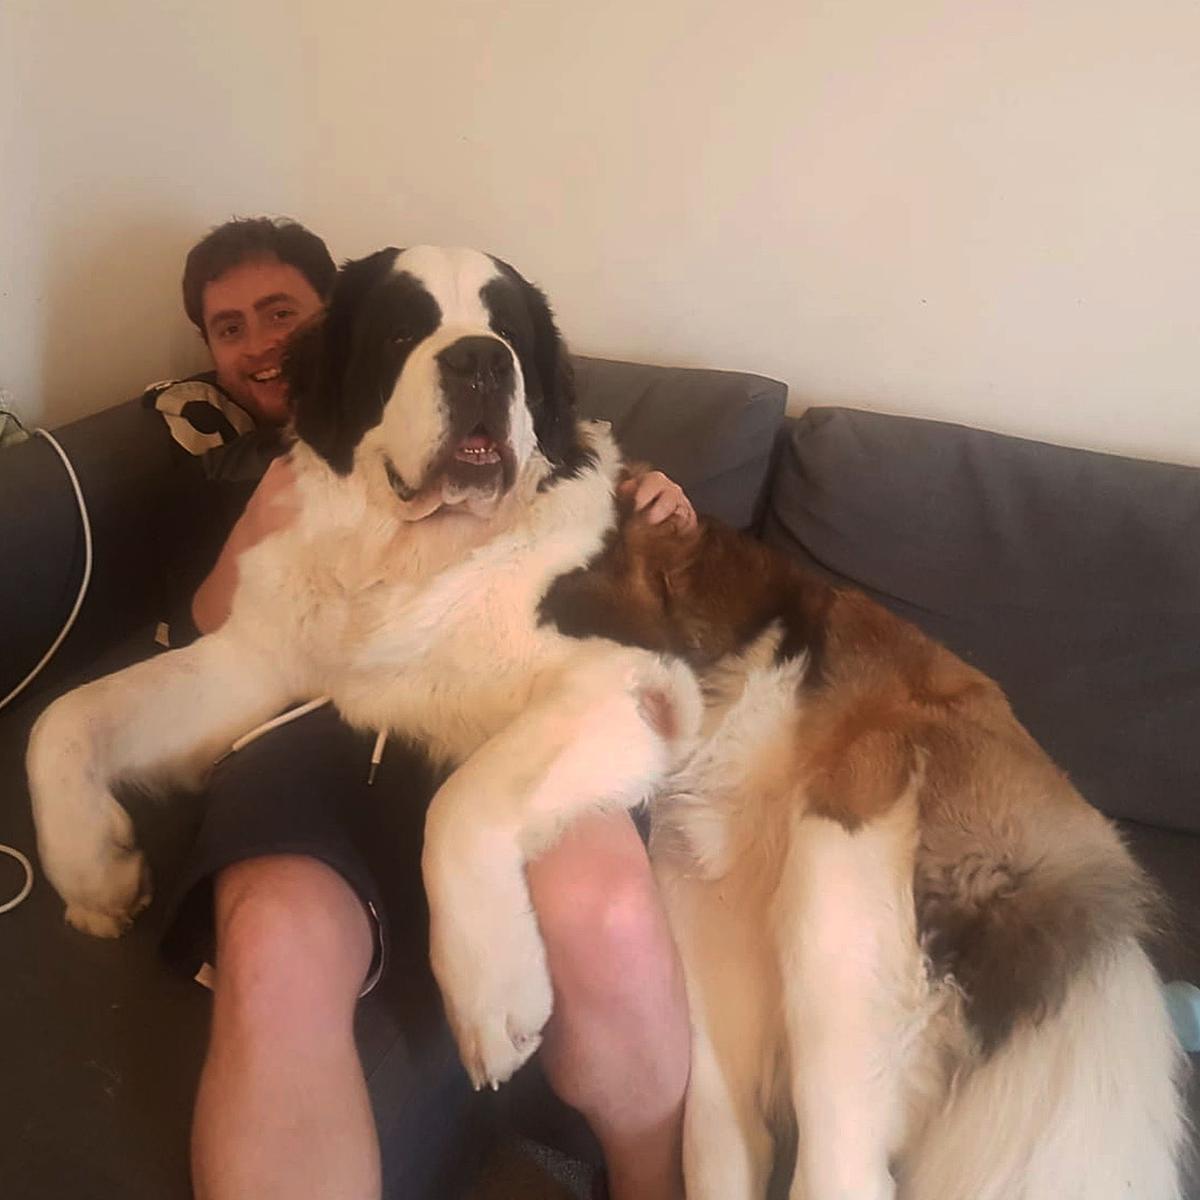 "Loveable" pooch Hercules enjoys a good cuddle with his owner Nick Bridge, but the 161 lb. hound is unaware of his enormous size. (Kennedy News and Media)